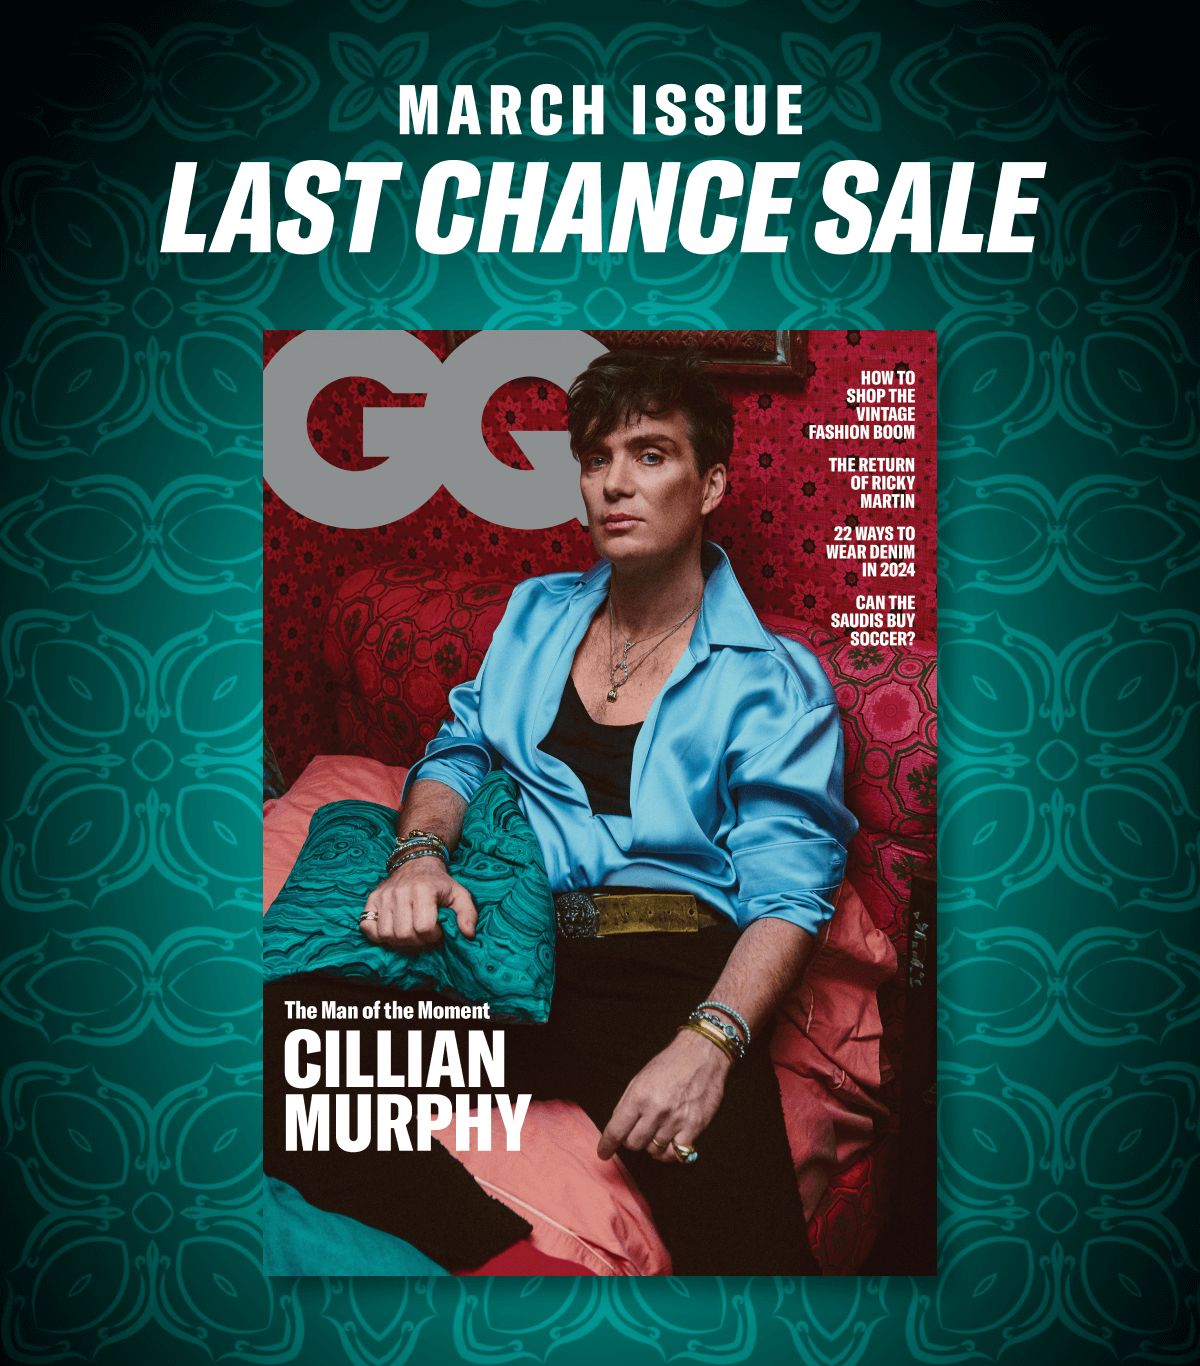 March Issue. Last Chance Sale.